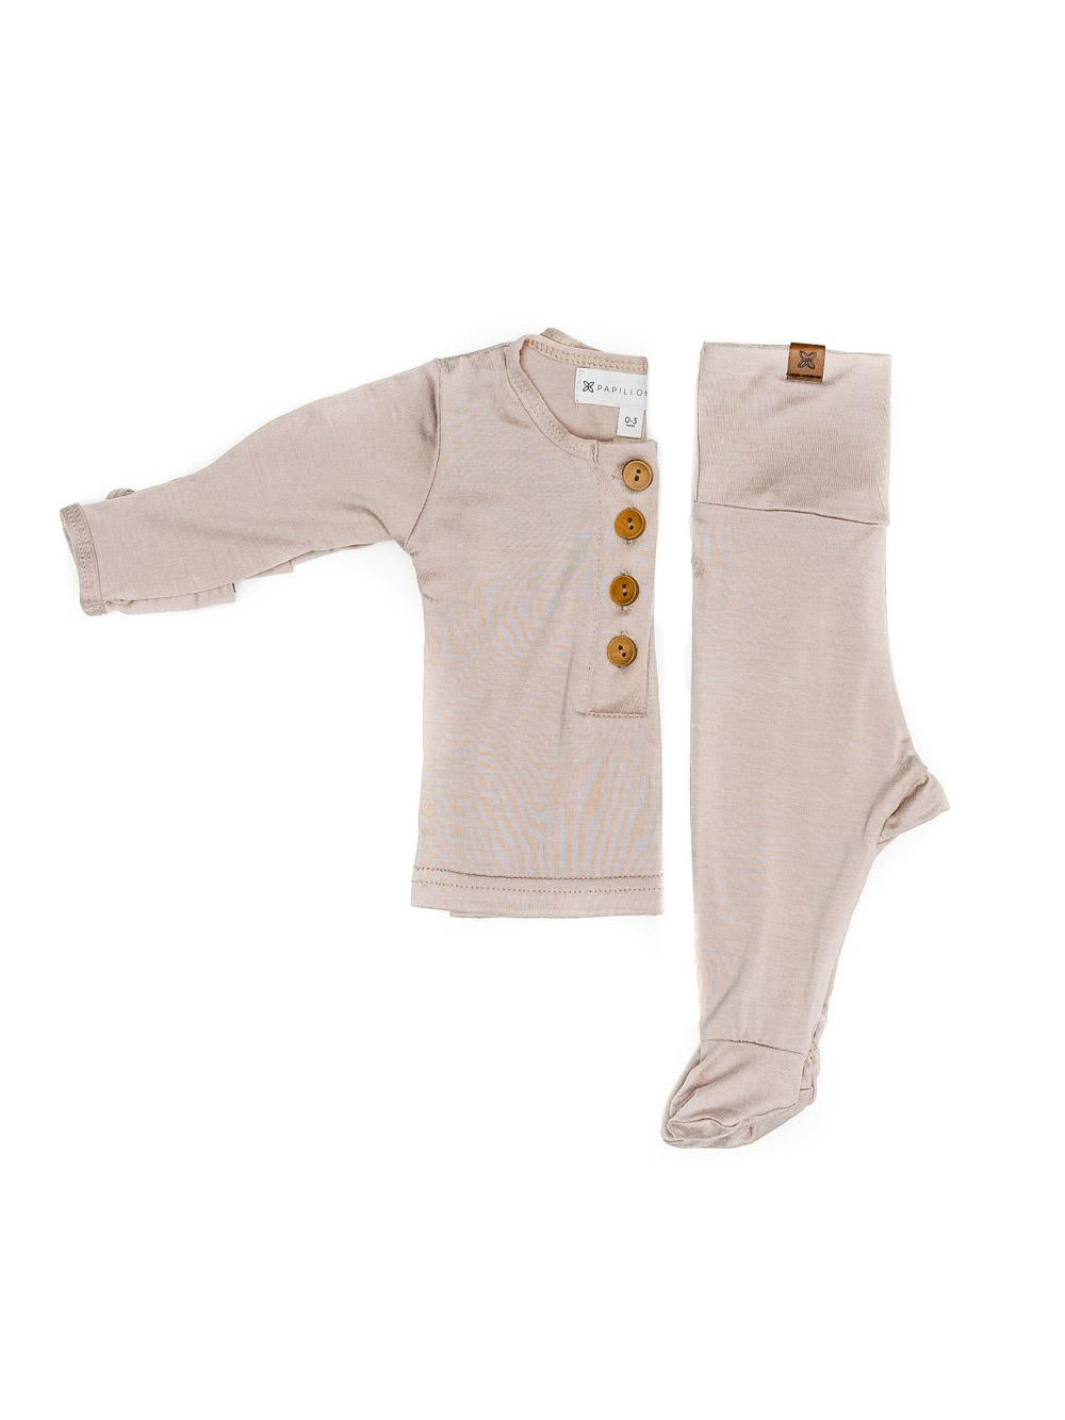 Fawn - Baby Knits Tops and Bottoms